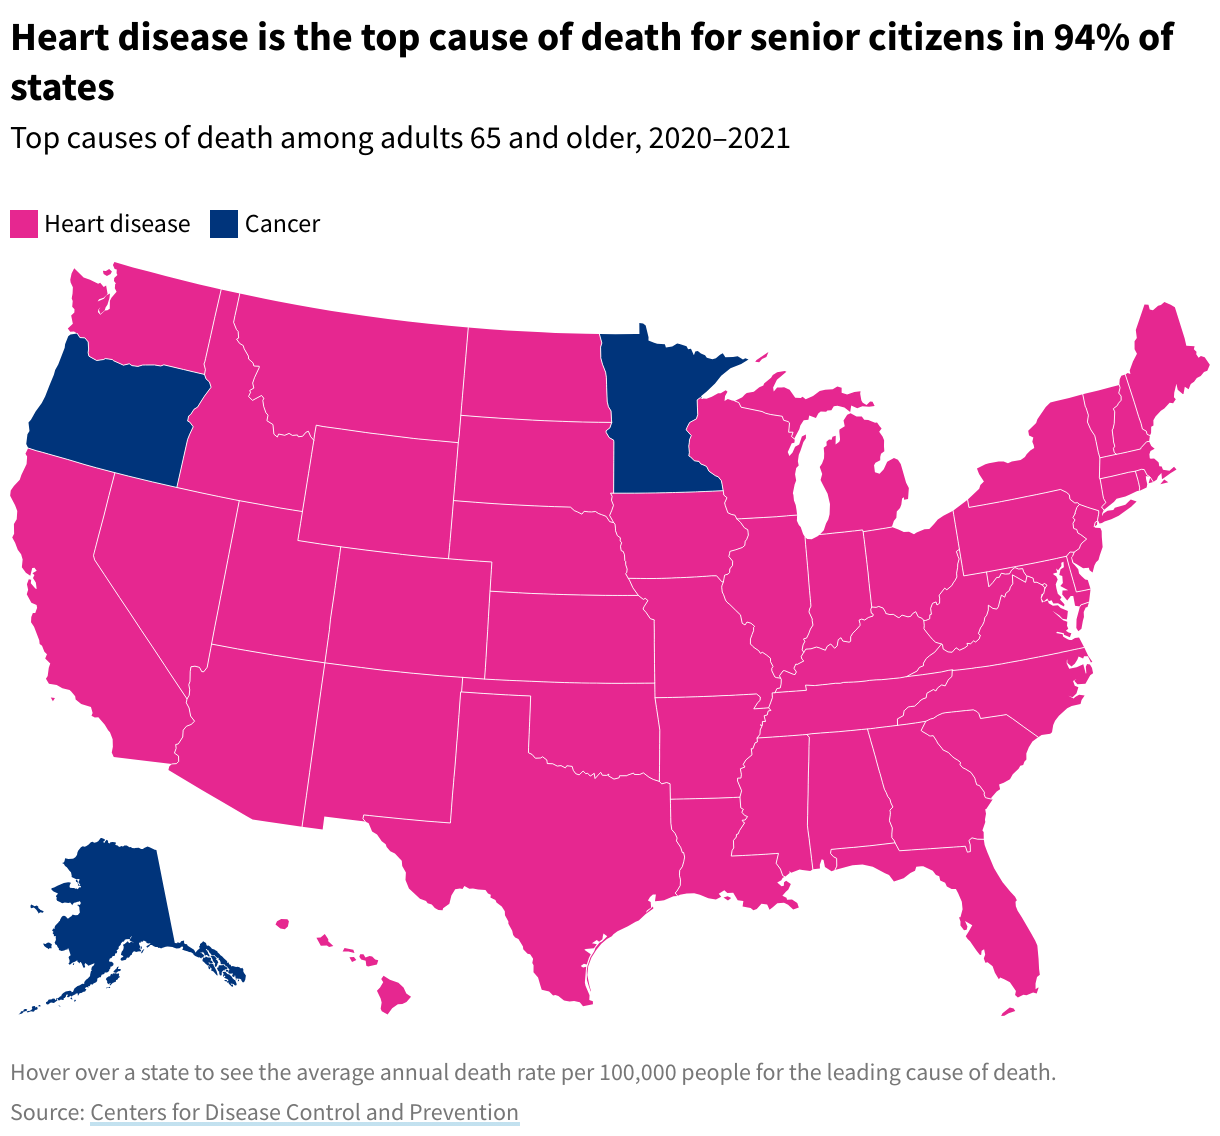 Map showing that Heart Disease is leading cause of death for all states except Alaska, Oregon, and Minnesota, where Cancer is the leading cause of death